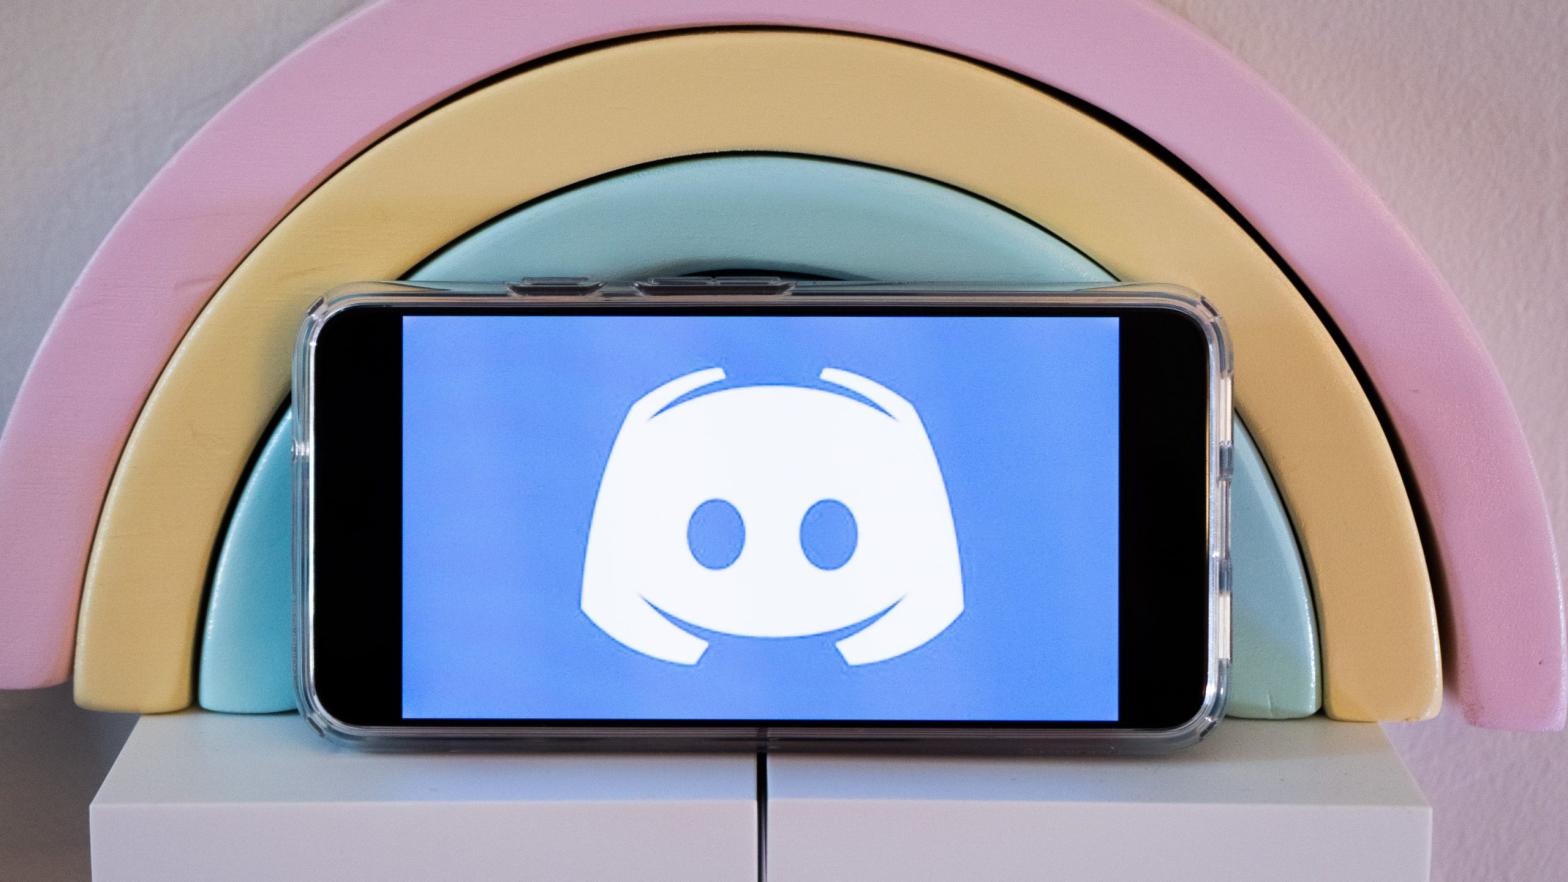 Discord's new partnership with PlayStation could help it become the chat app for every platform. (Photo: Florence Ion/Gizmodo)